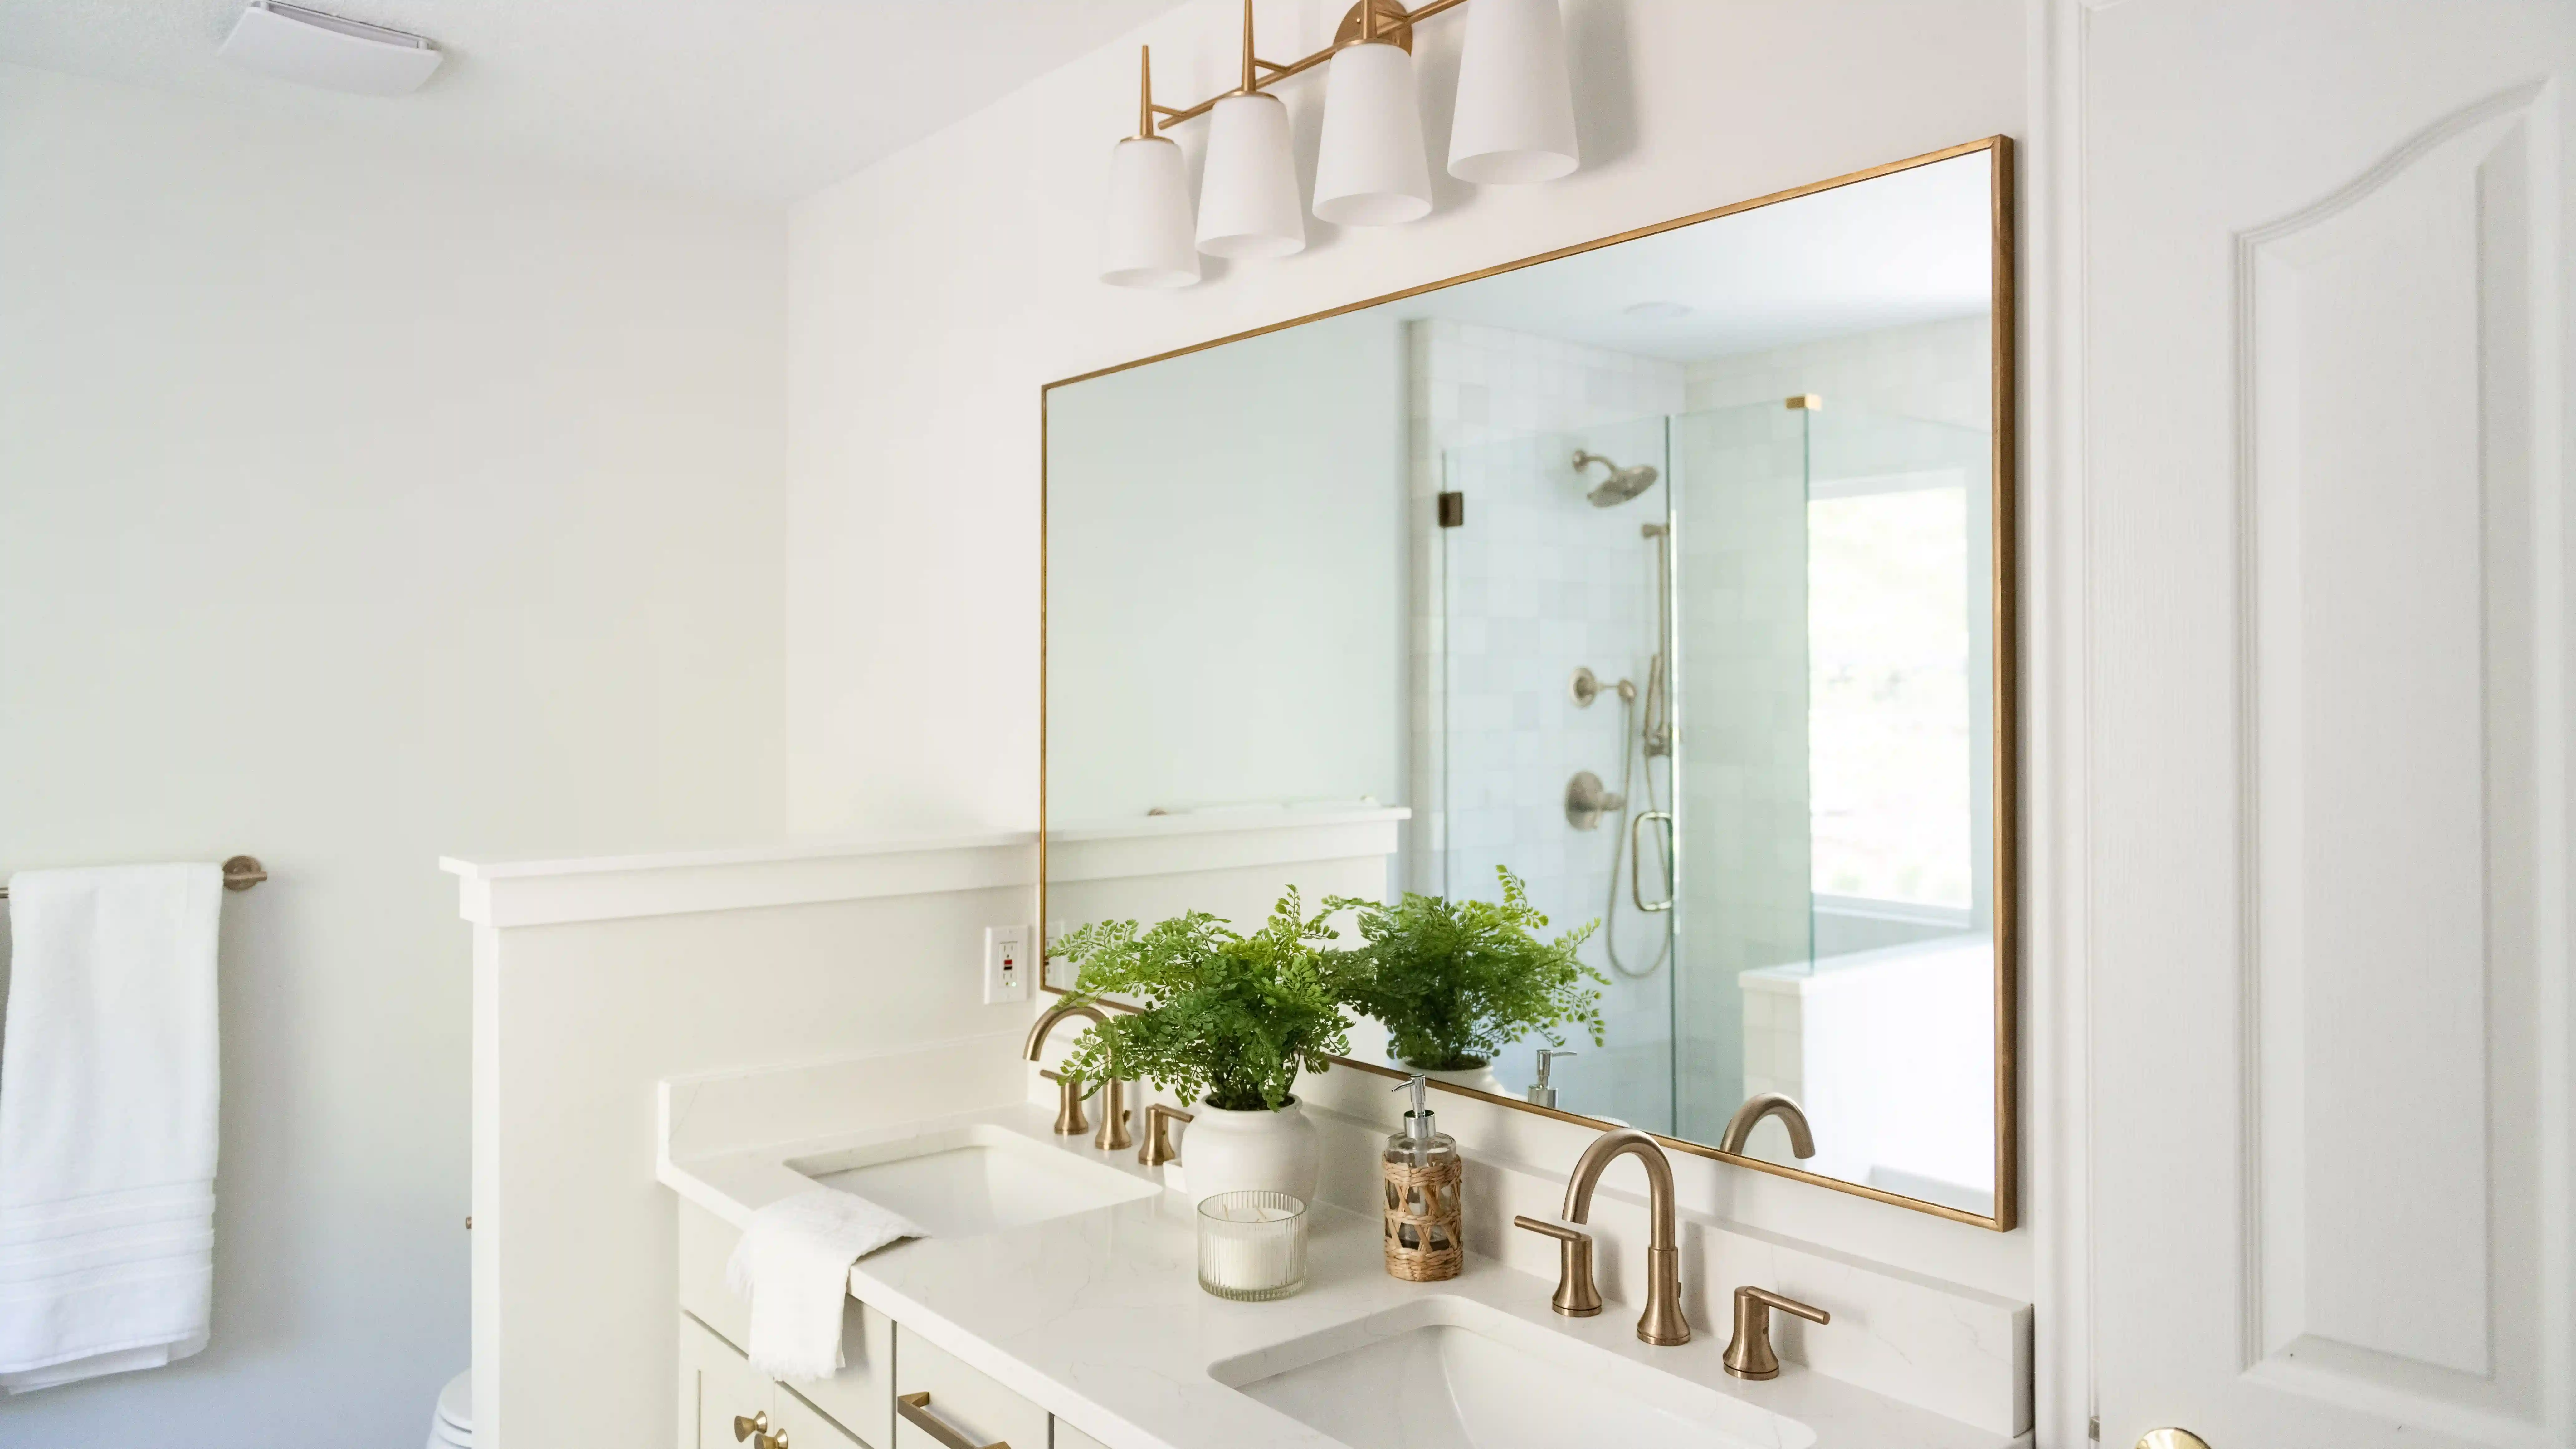 A bathroom with white walls, white countertops and double vanity, and brass accents in the faucets, mirror frame, and lighting. A wicker woven soap holder sits on the counter by each sink. A fern in a white vase with a candle sitting next to it is on the counter between sinks. 